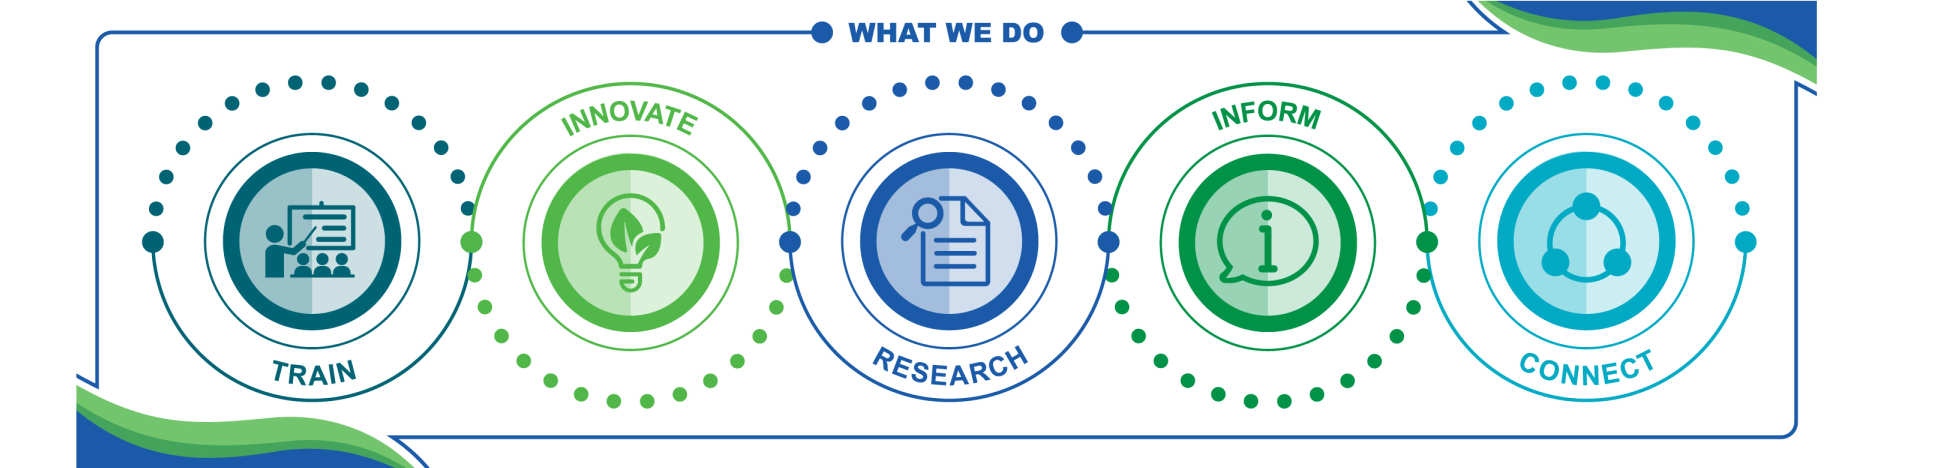 Graphic with icons showing core parts of our work - Train, Innovate, Research, Inform, Connect